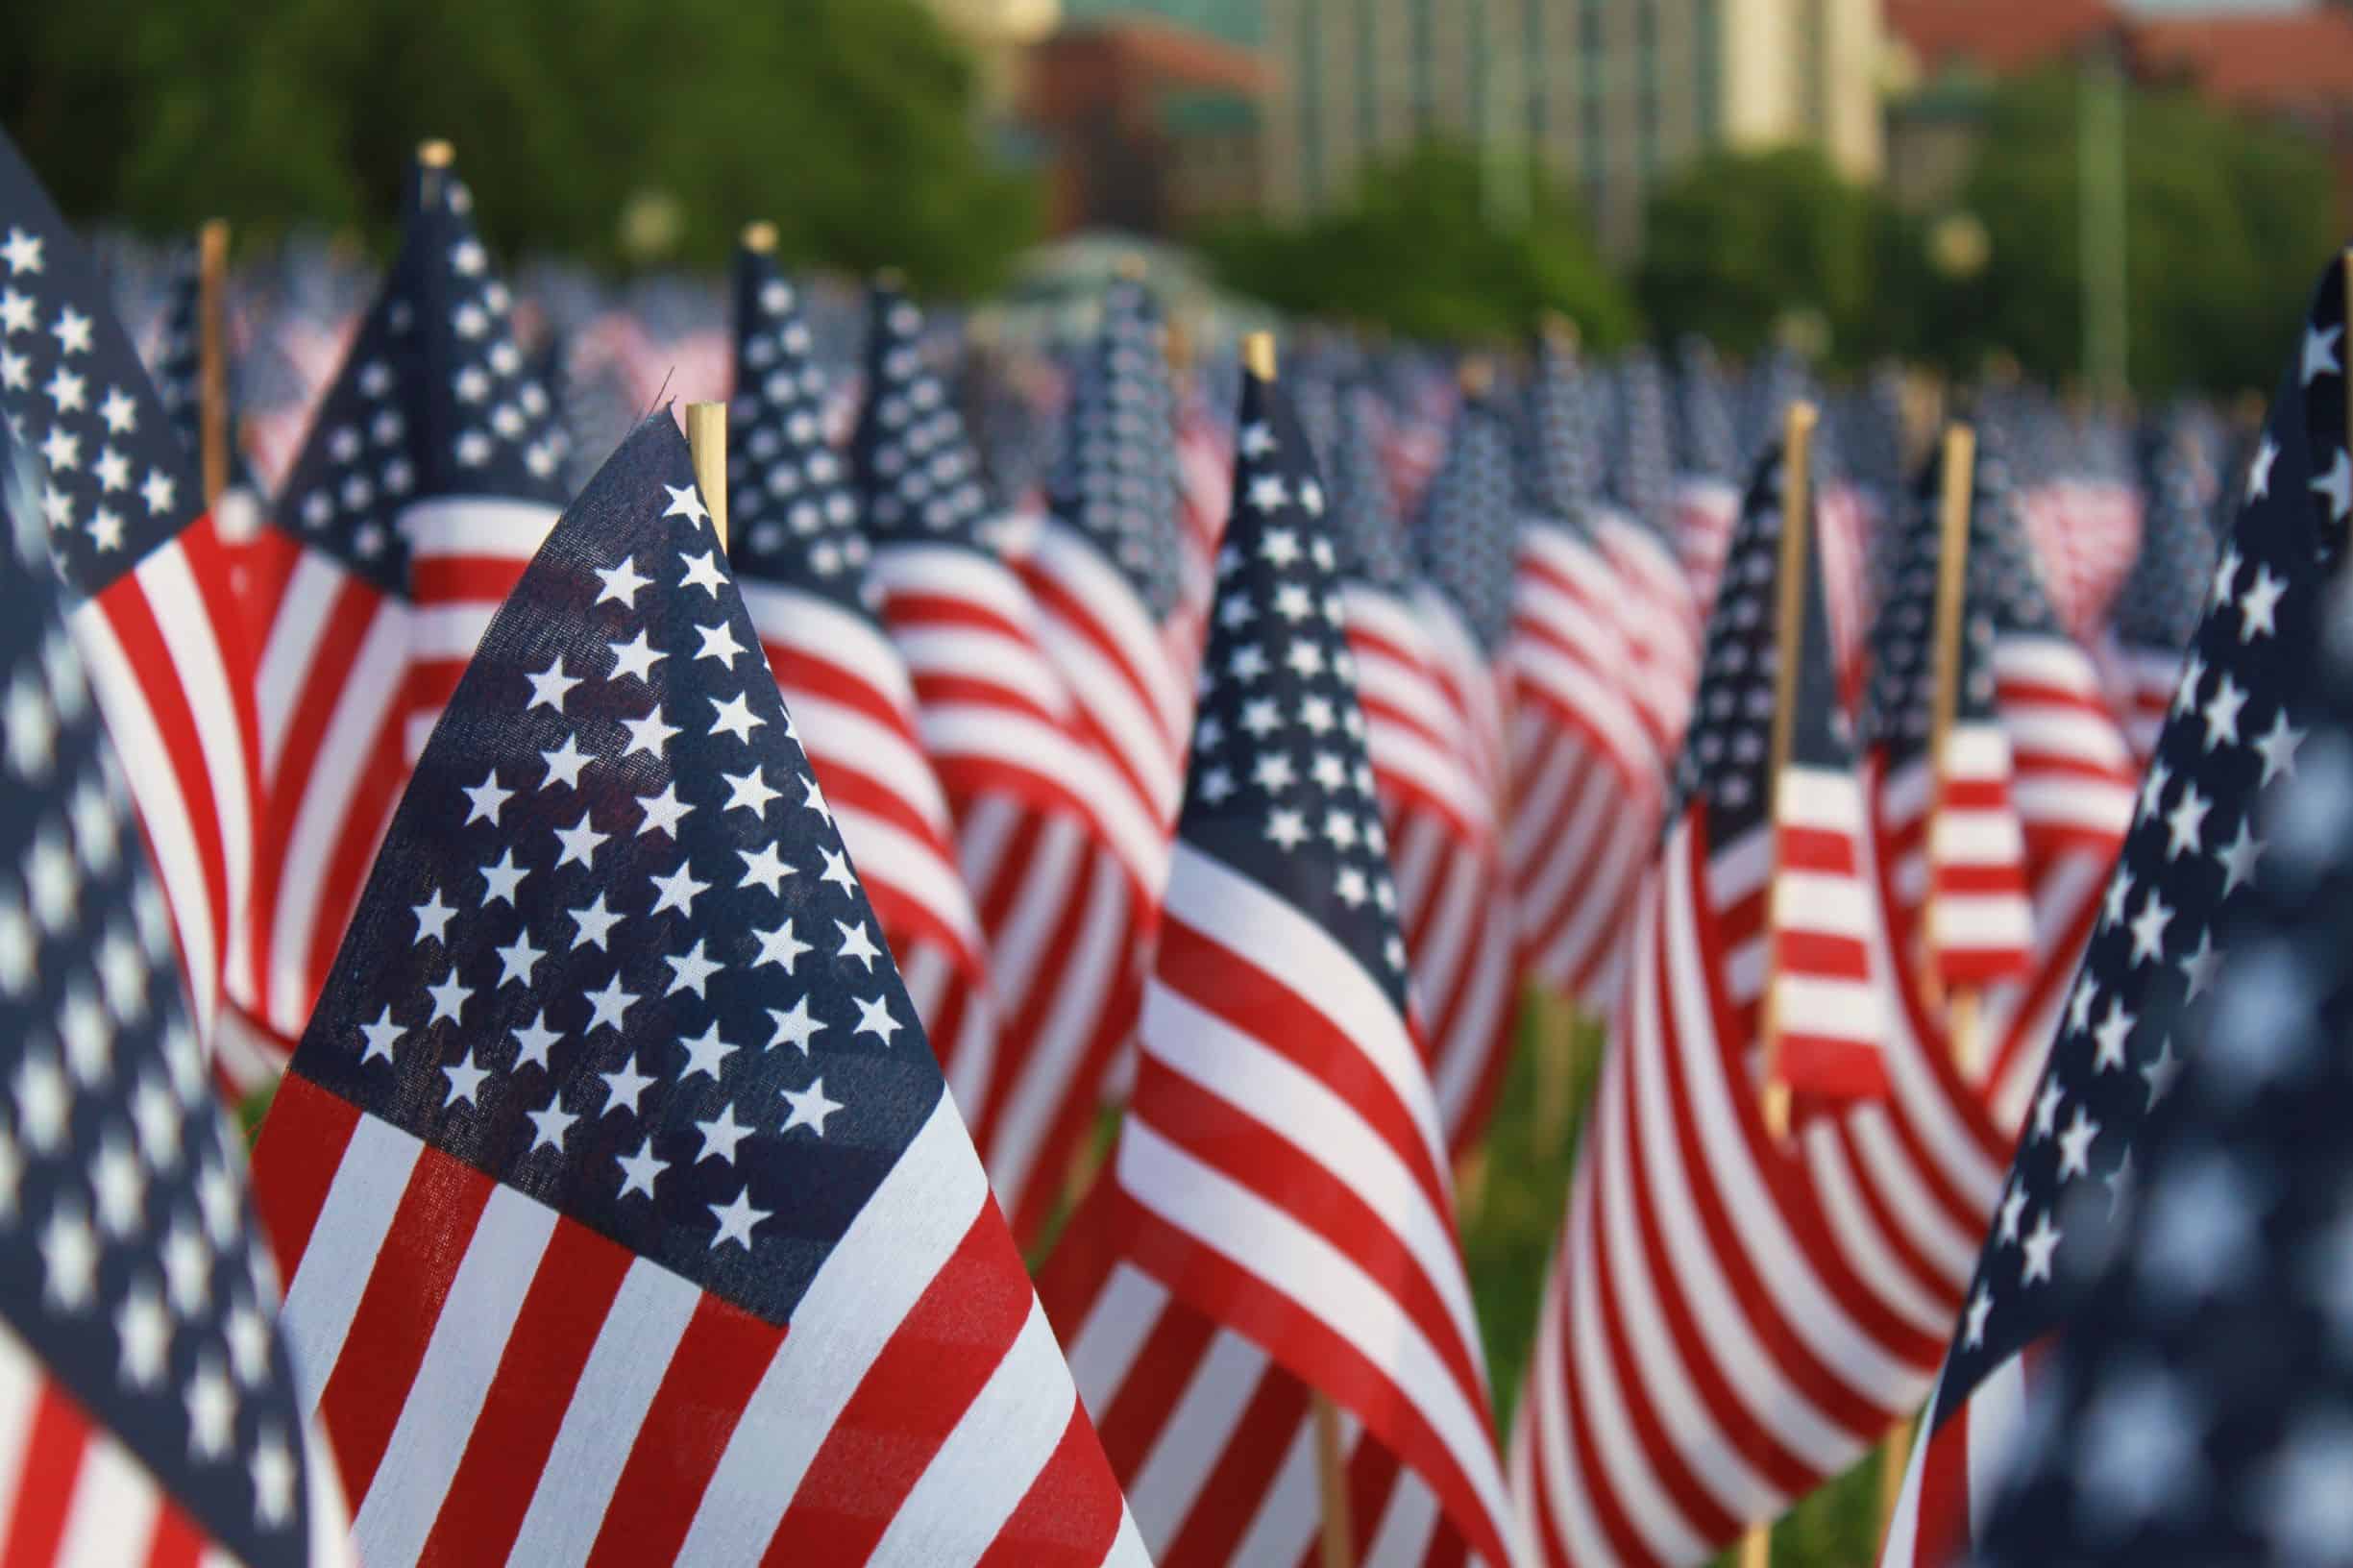 American flags adorn a lawn on Memorial Day.